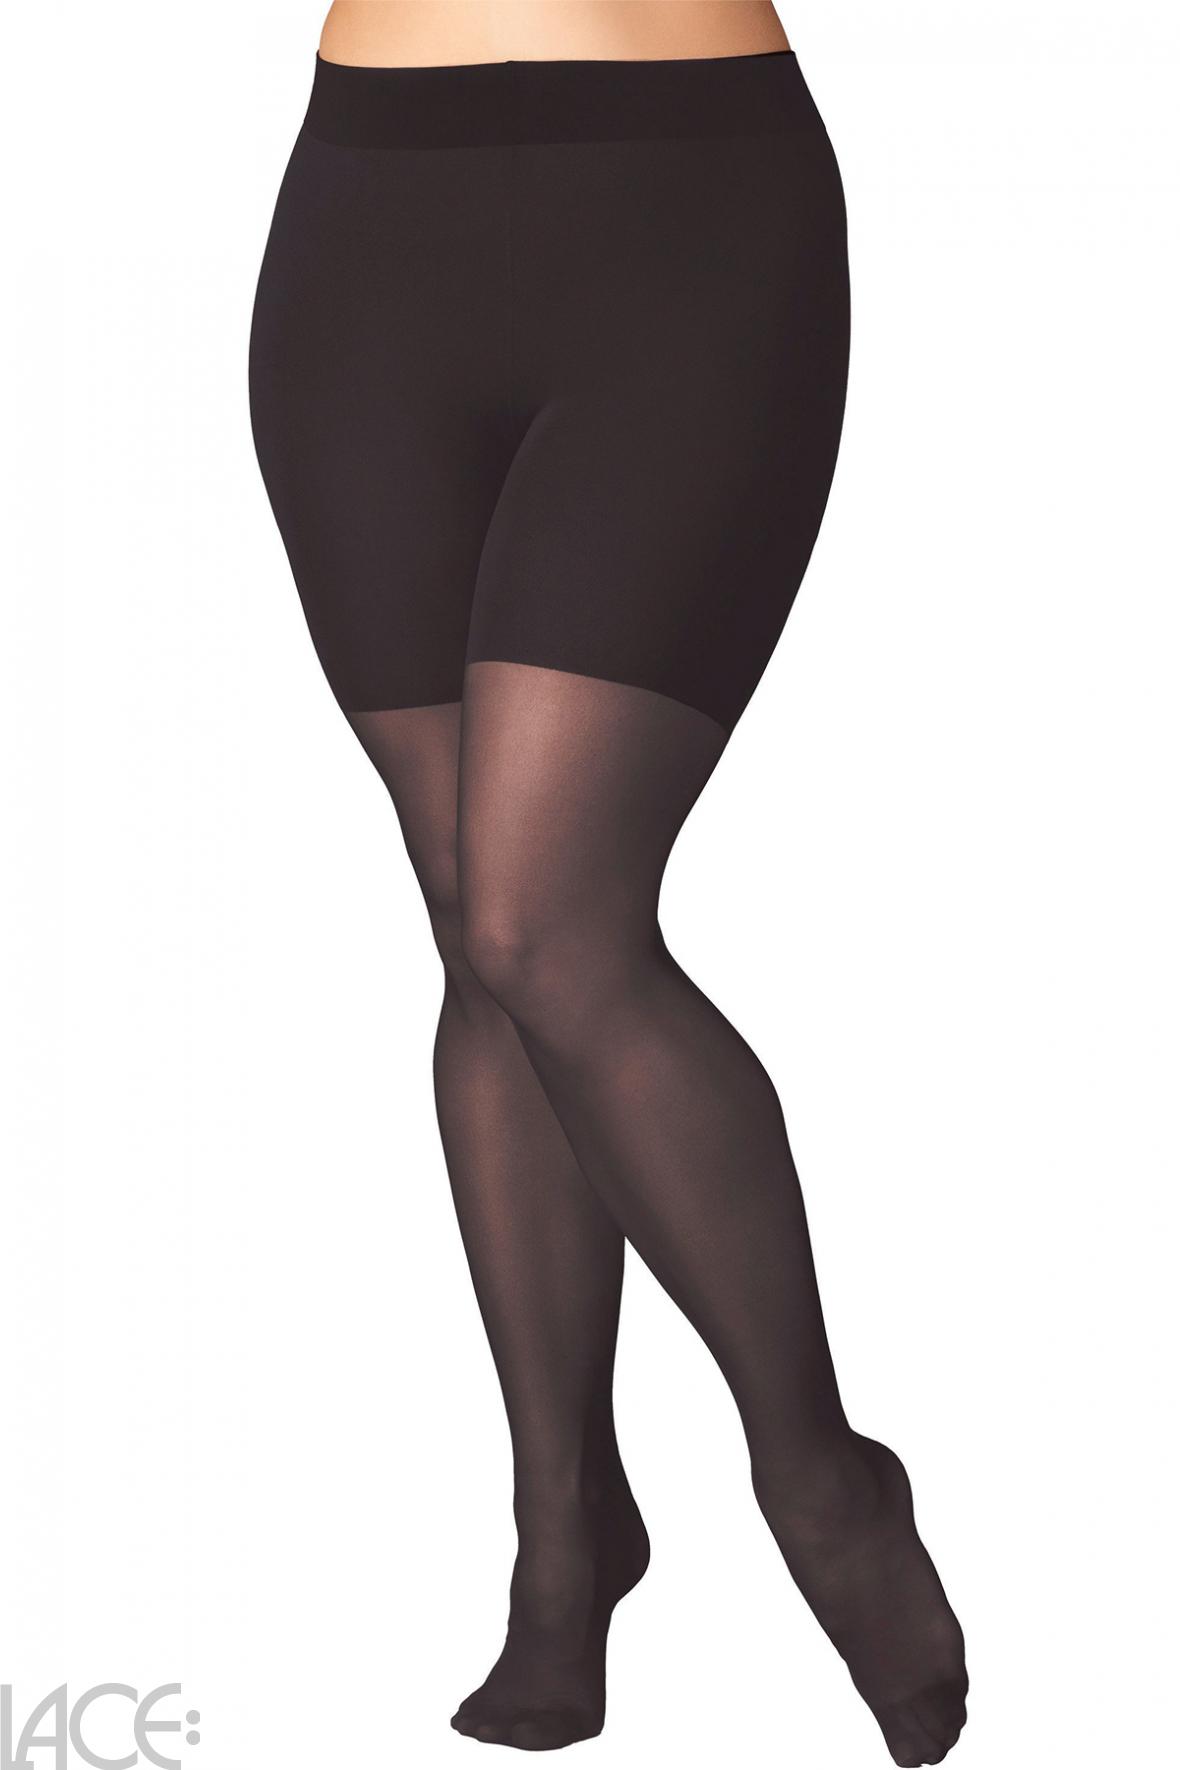  Tights - Falke - Beauty Plus 50 Tights - for short legs